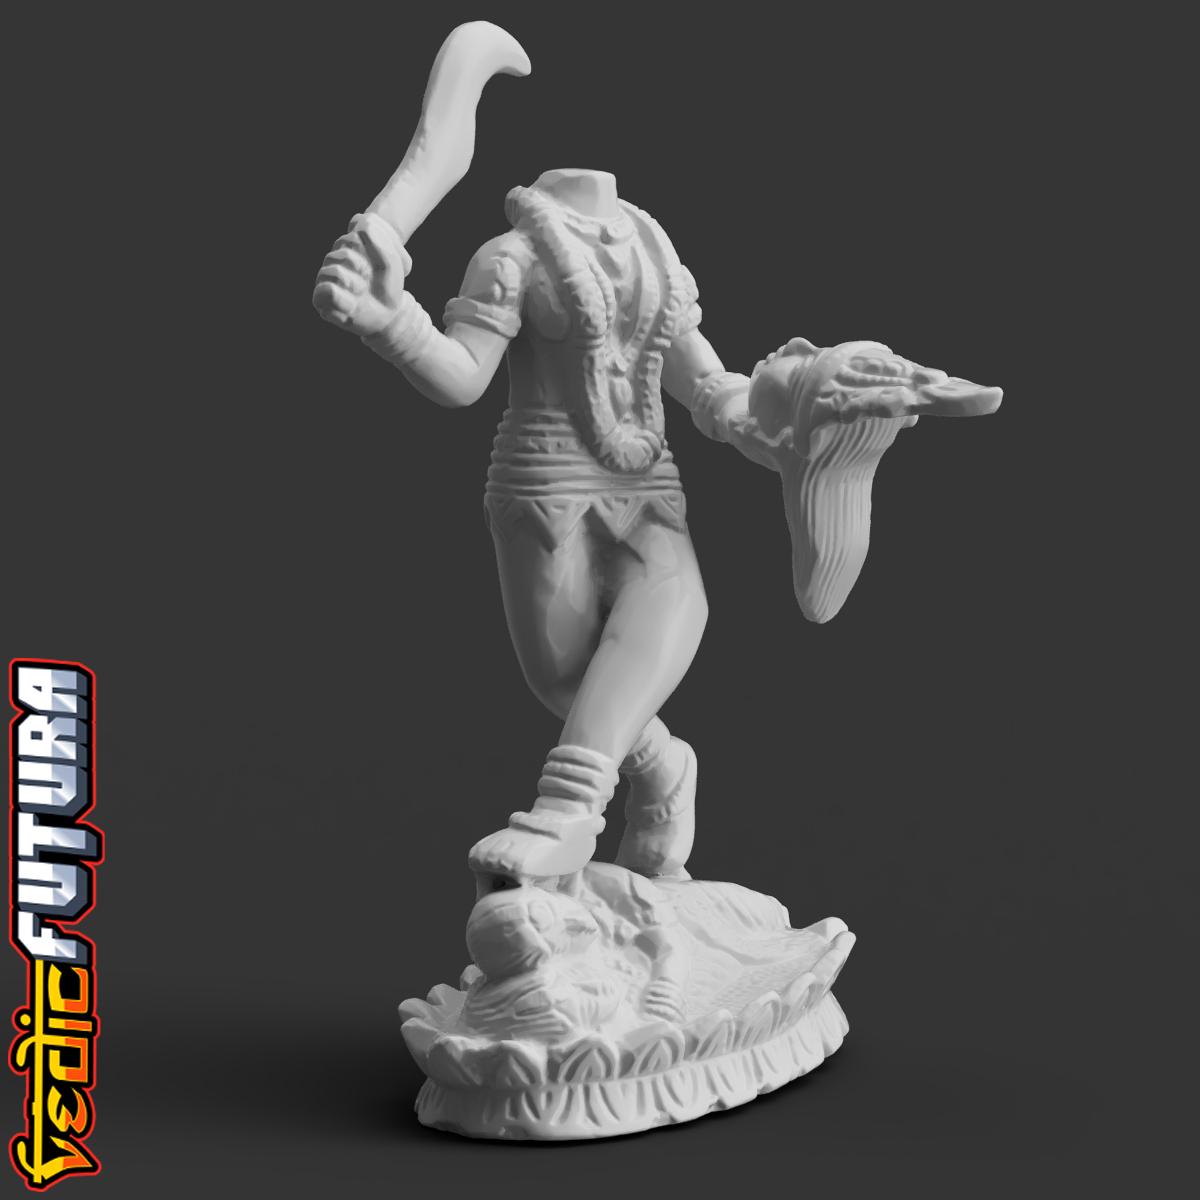 Chinnamasta - “She whose head is severed" 3d model